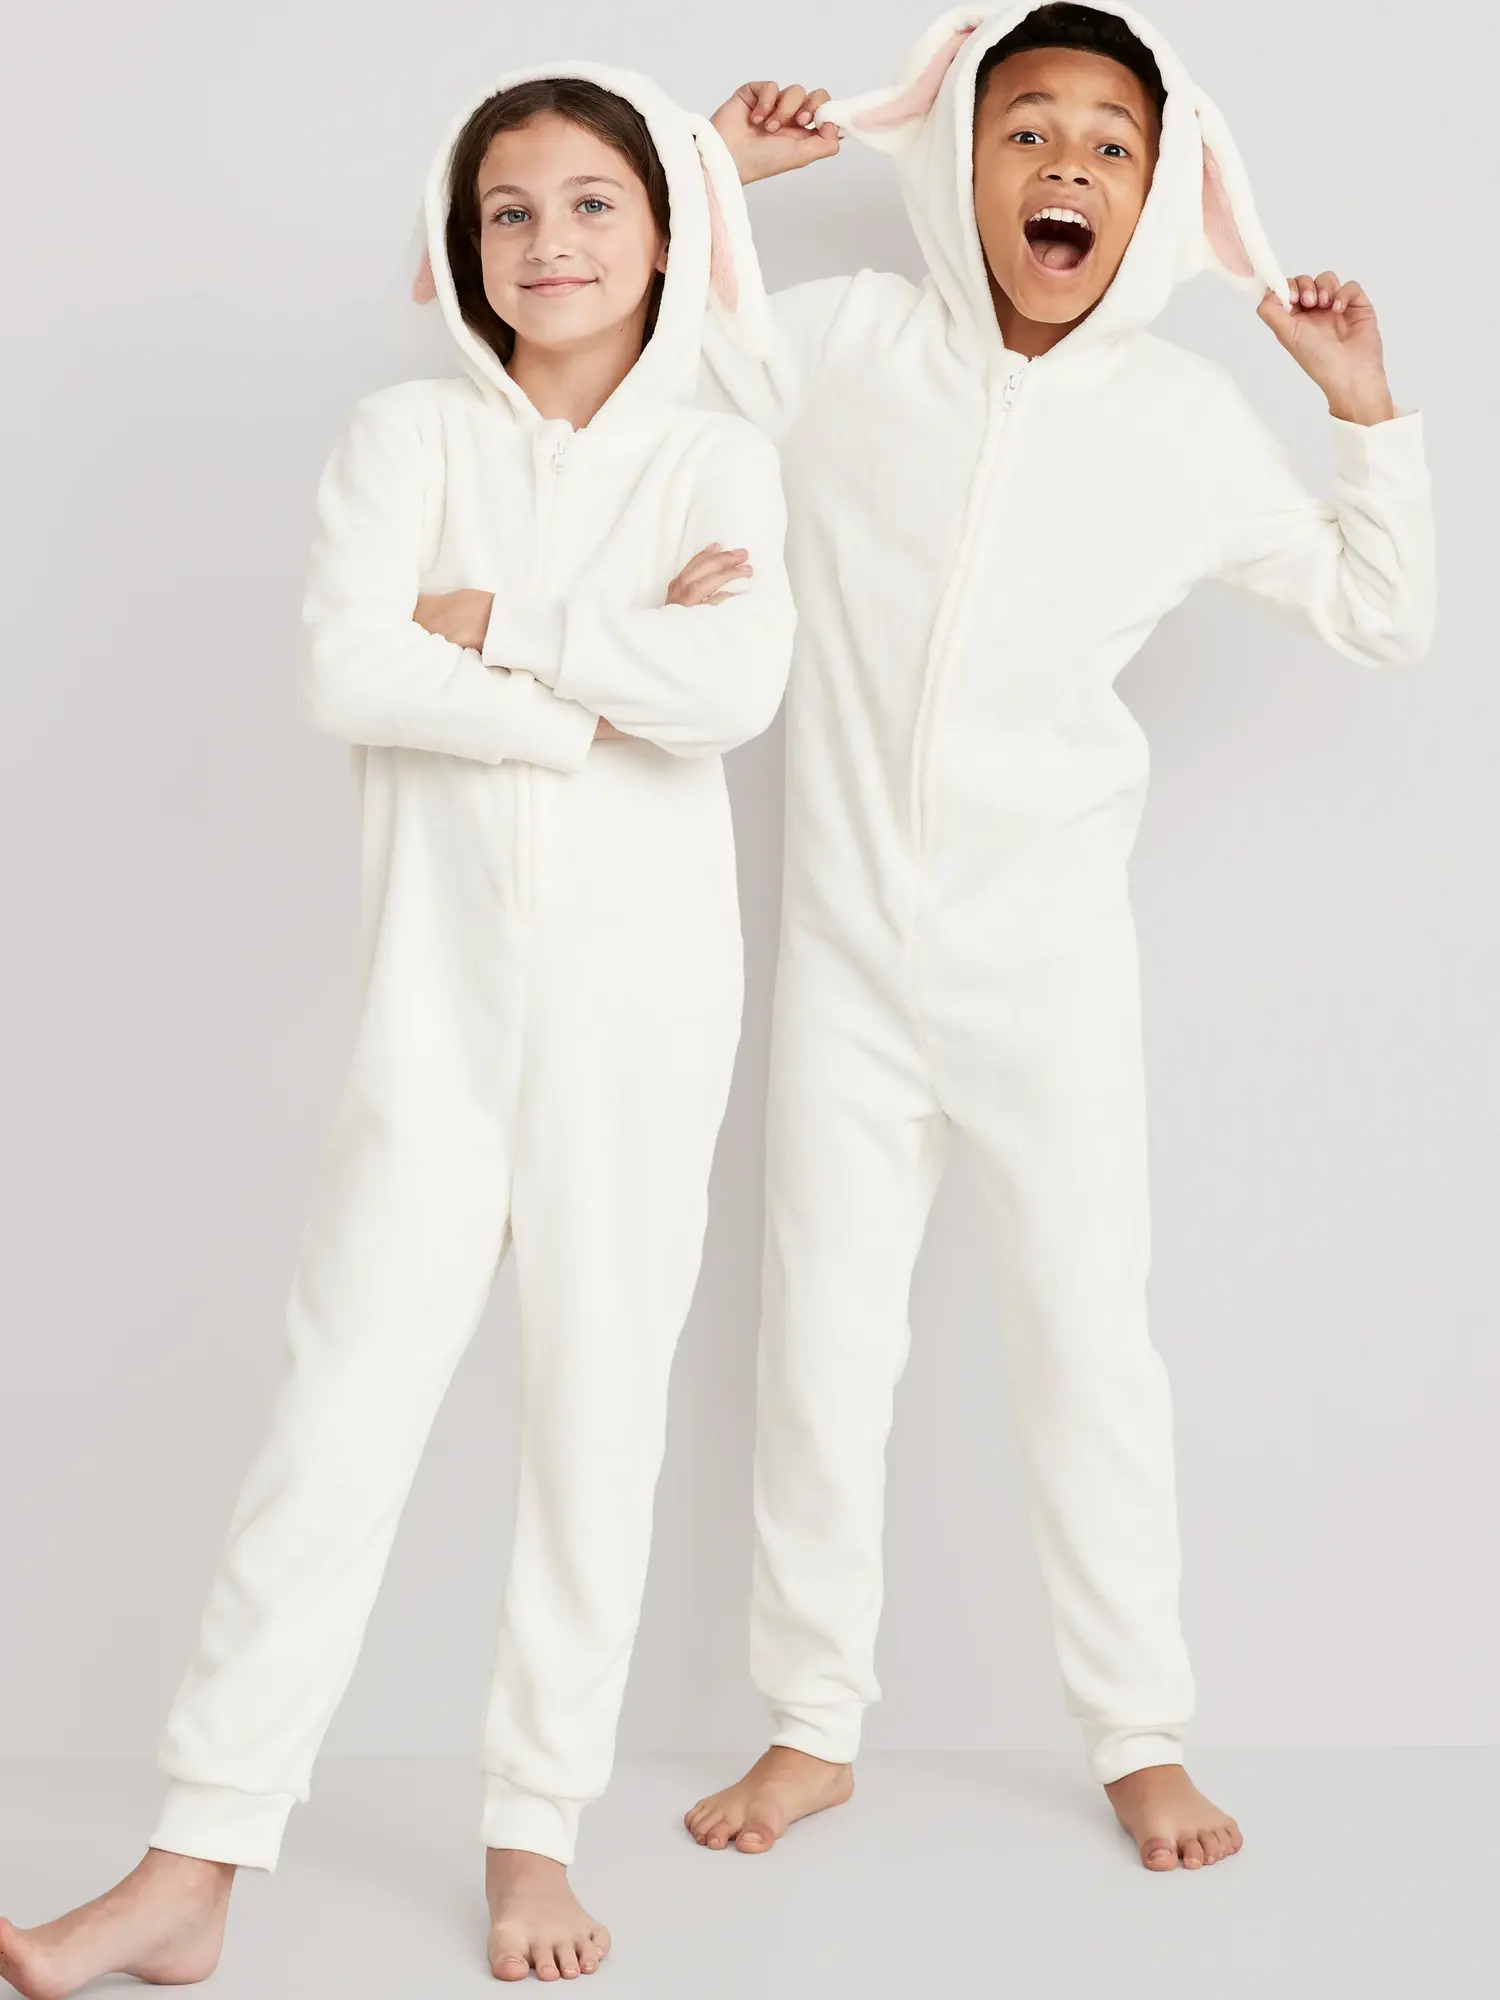 Old Navy Gender-Neutral Sherpa Hooded "Bunny" One-Piece Pajamas for Kids white. 1